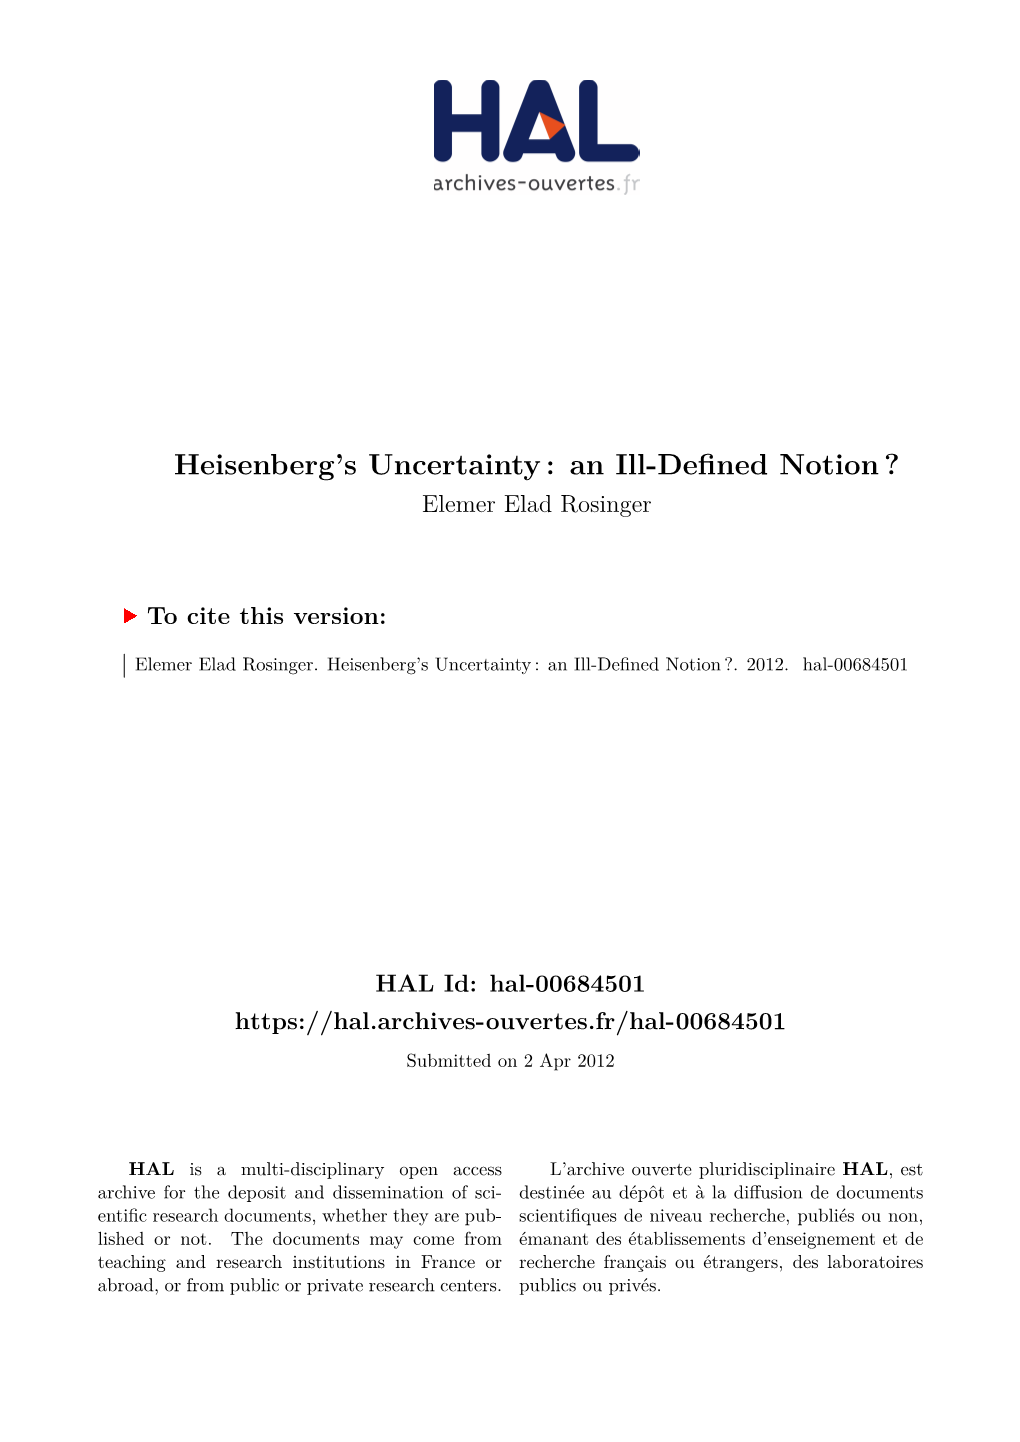 Heisenberg's Uncertainty: an Ill-Defined Notion?